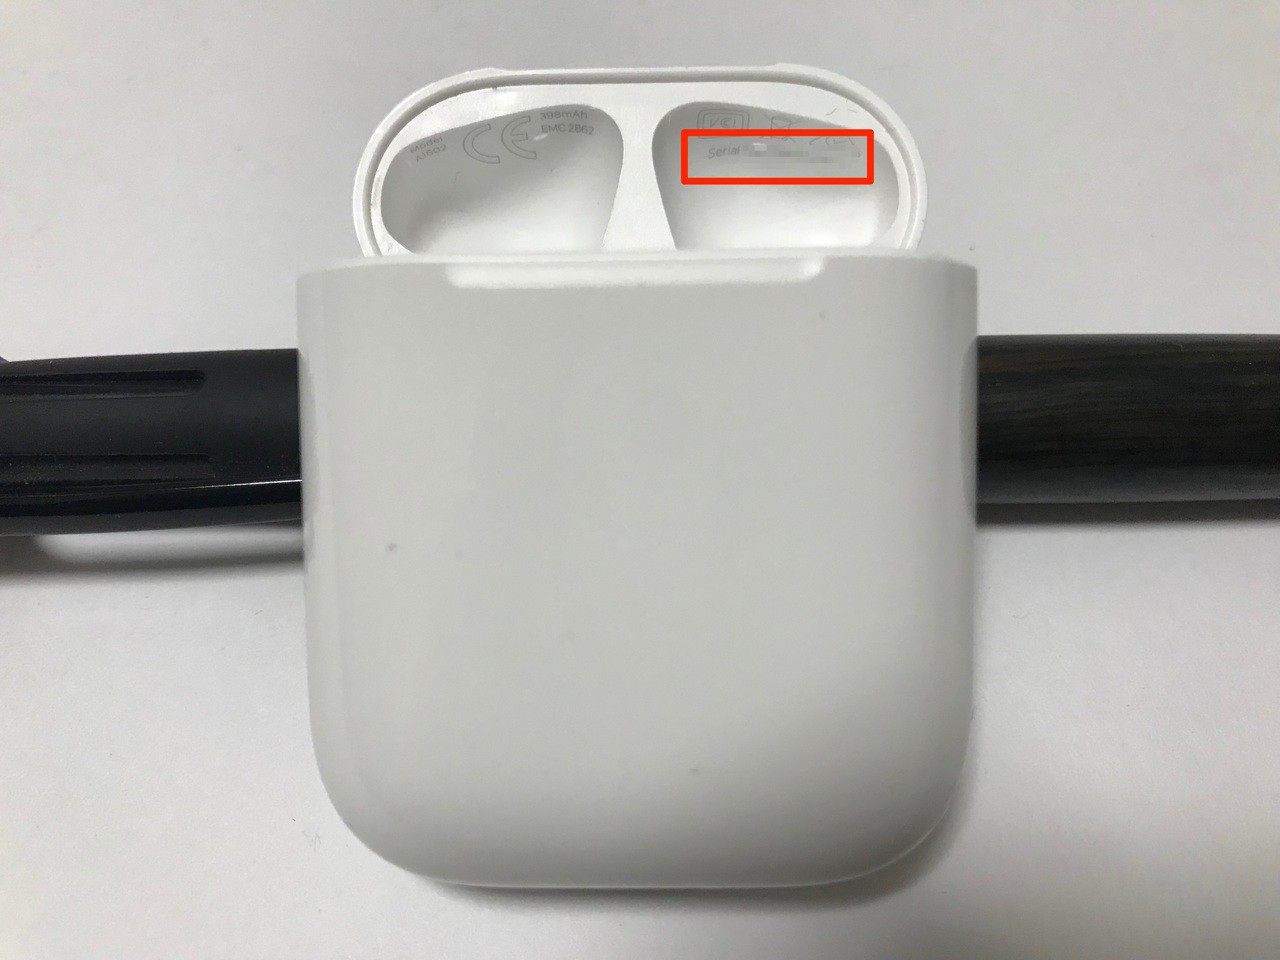 Airpods case